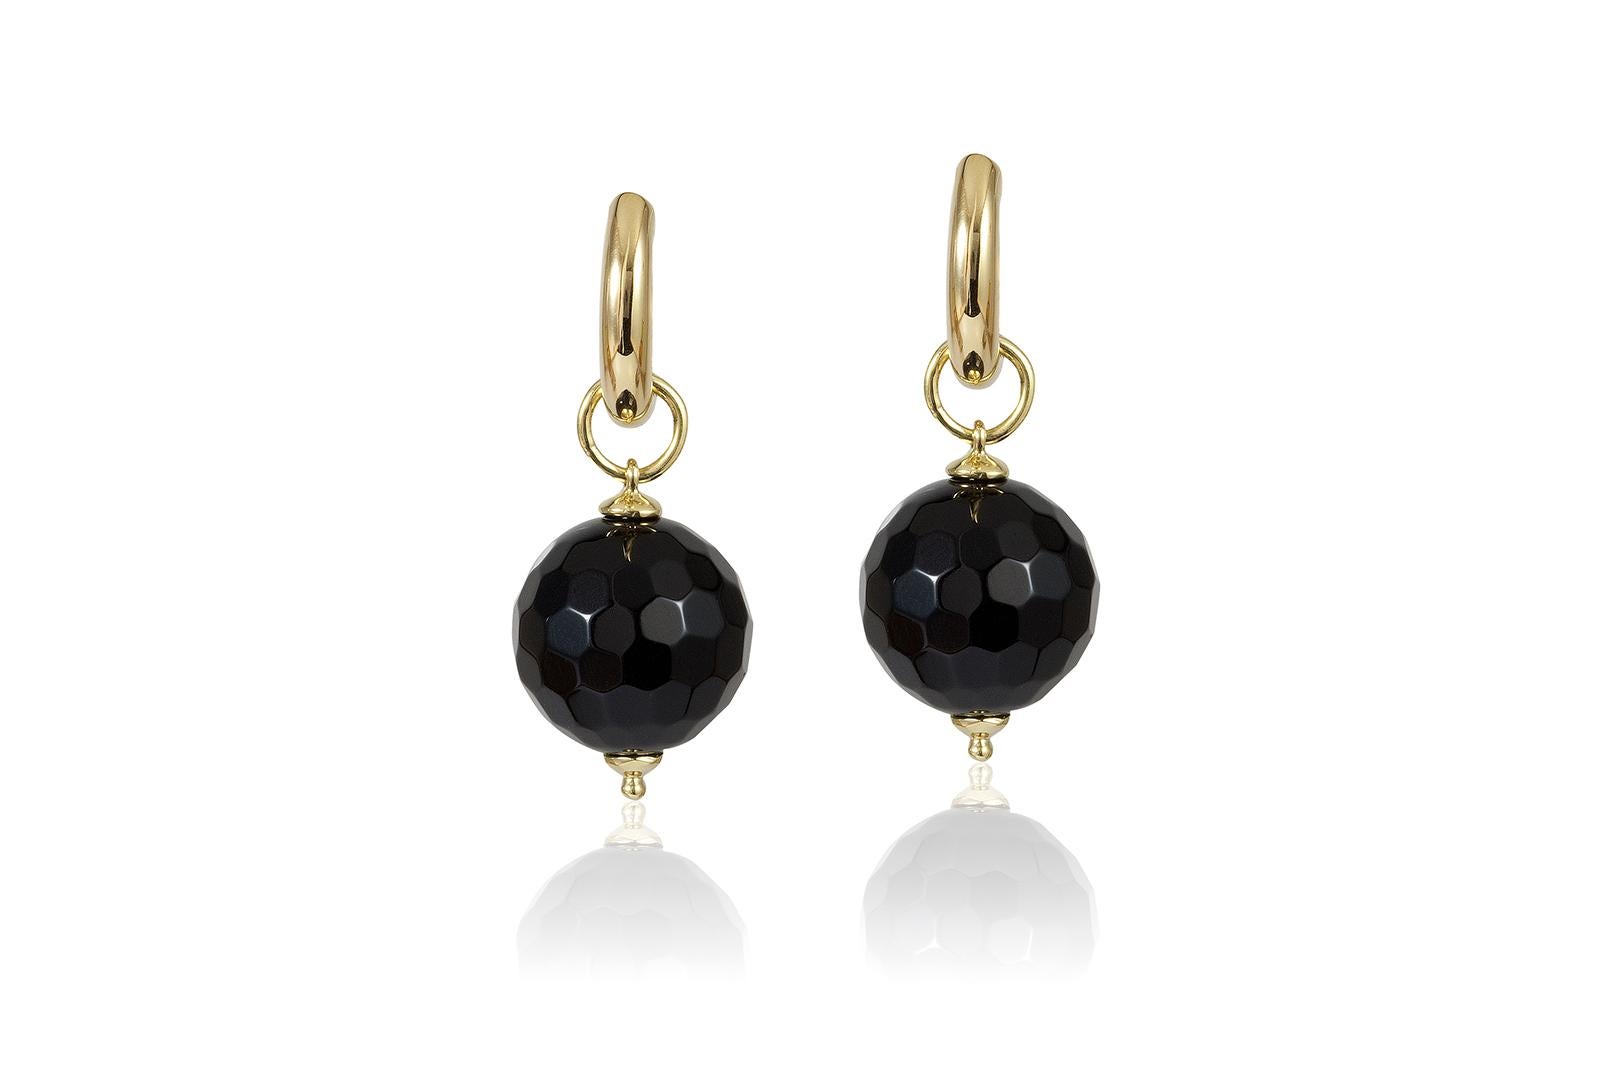 Introducing the epitome of elegance and sophistication: the Black Agate Faceted Round Bead Double Loop Earrings from the exquisite 'Beyond' Collection. Crafted in lustrous 18K Yellow Gold, these stunning earrings feature mesmerizing black agate